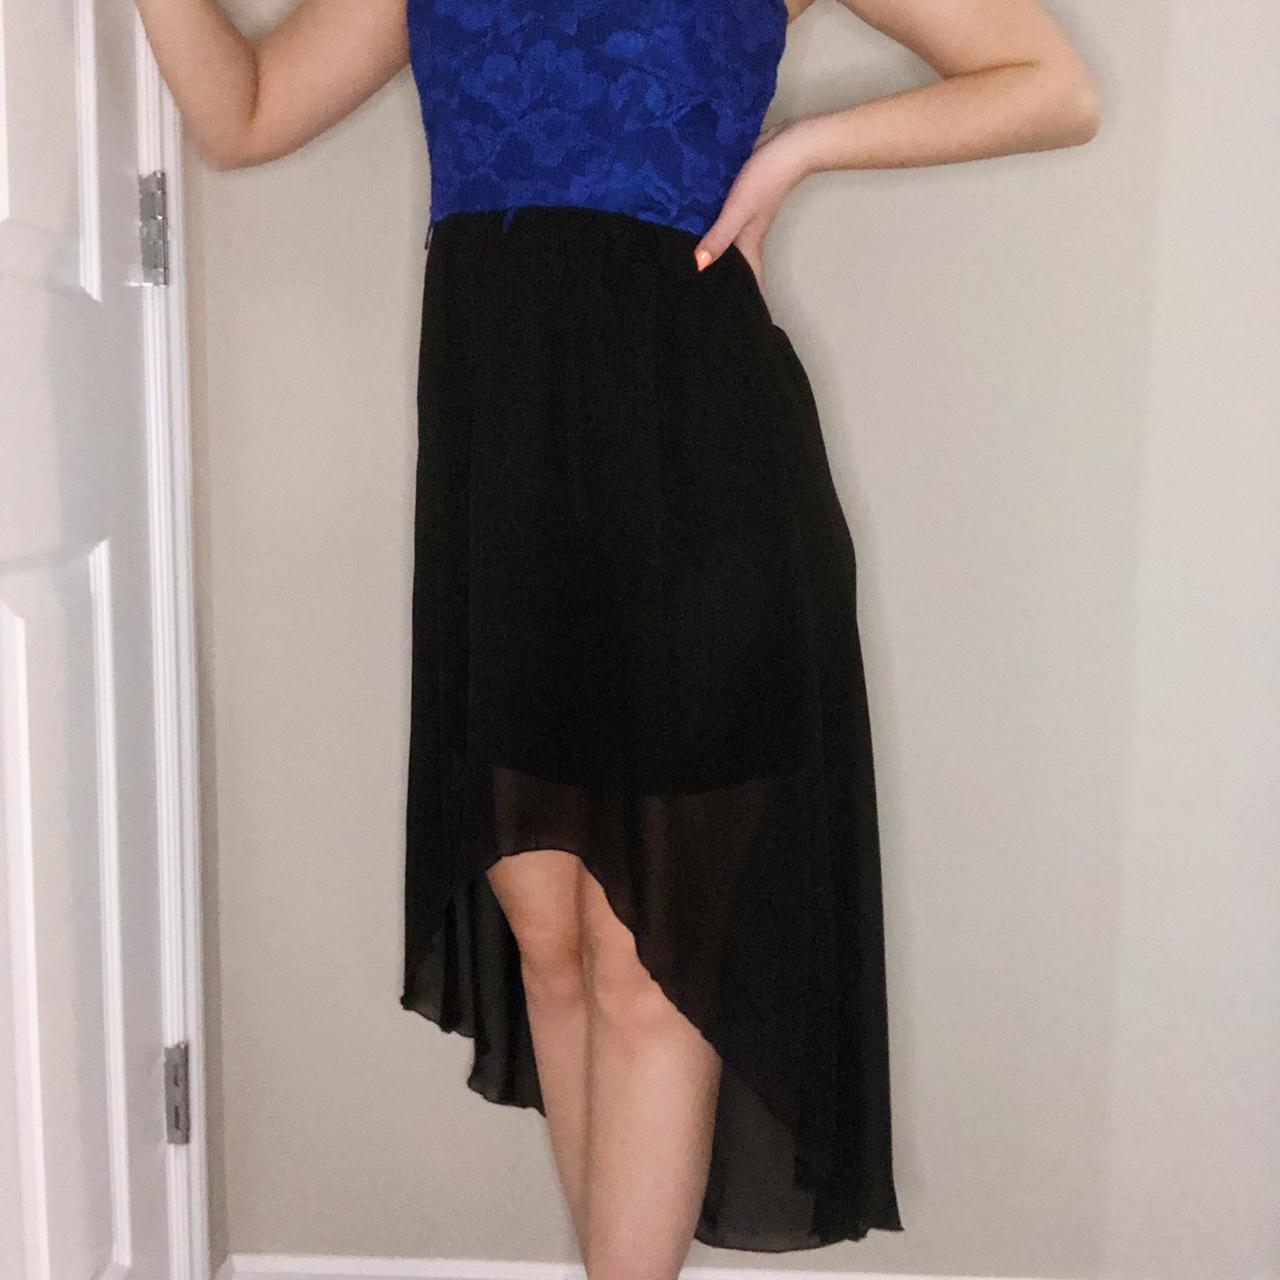 Blue and Black High Low Dress with Belt Loops - Depop